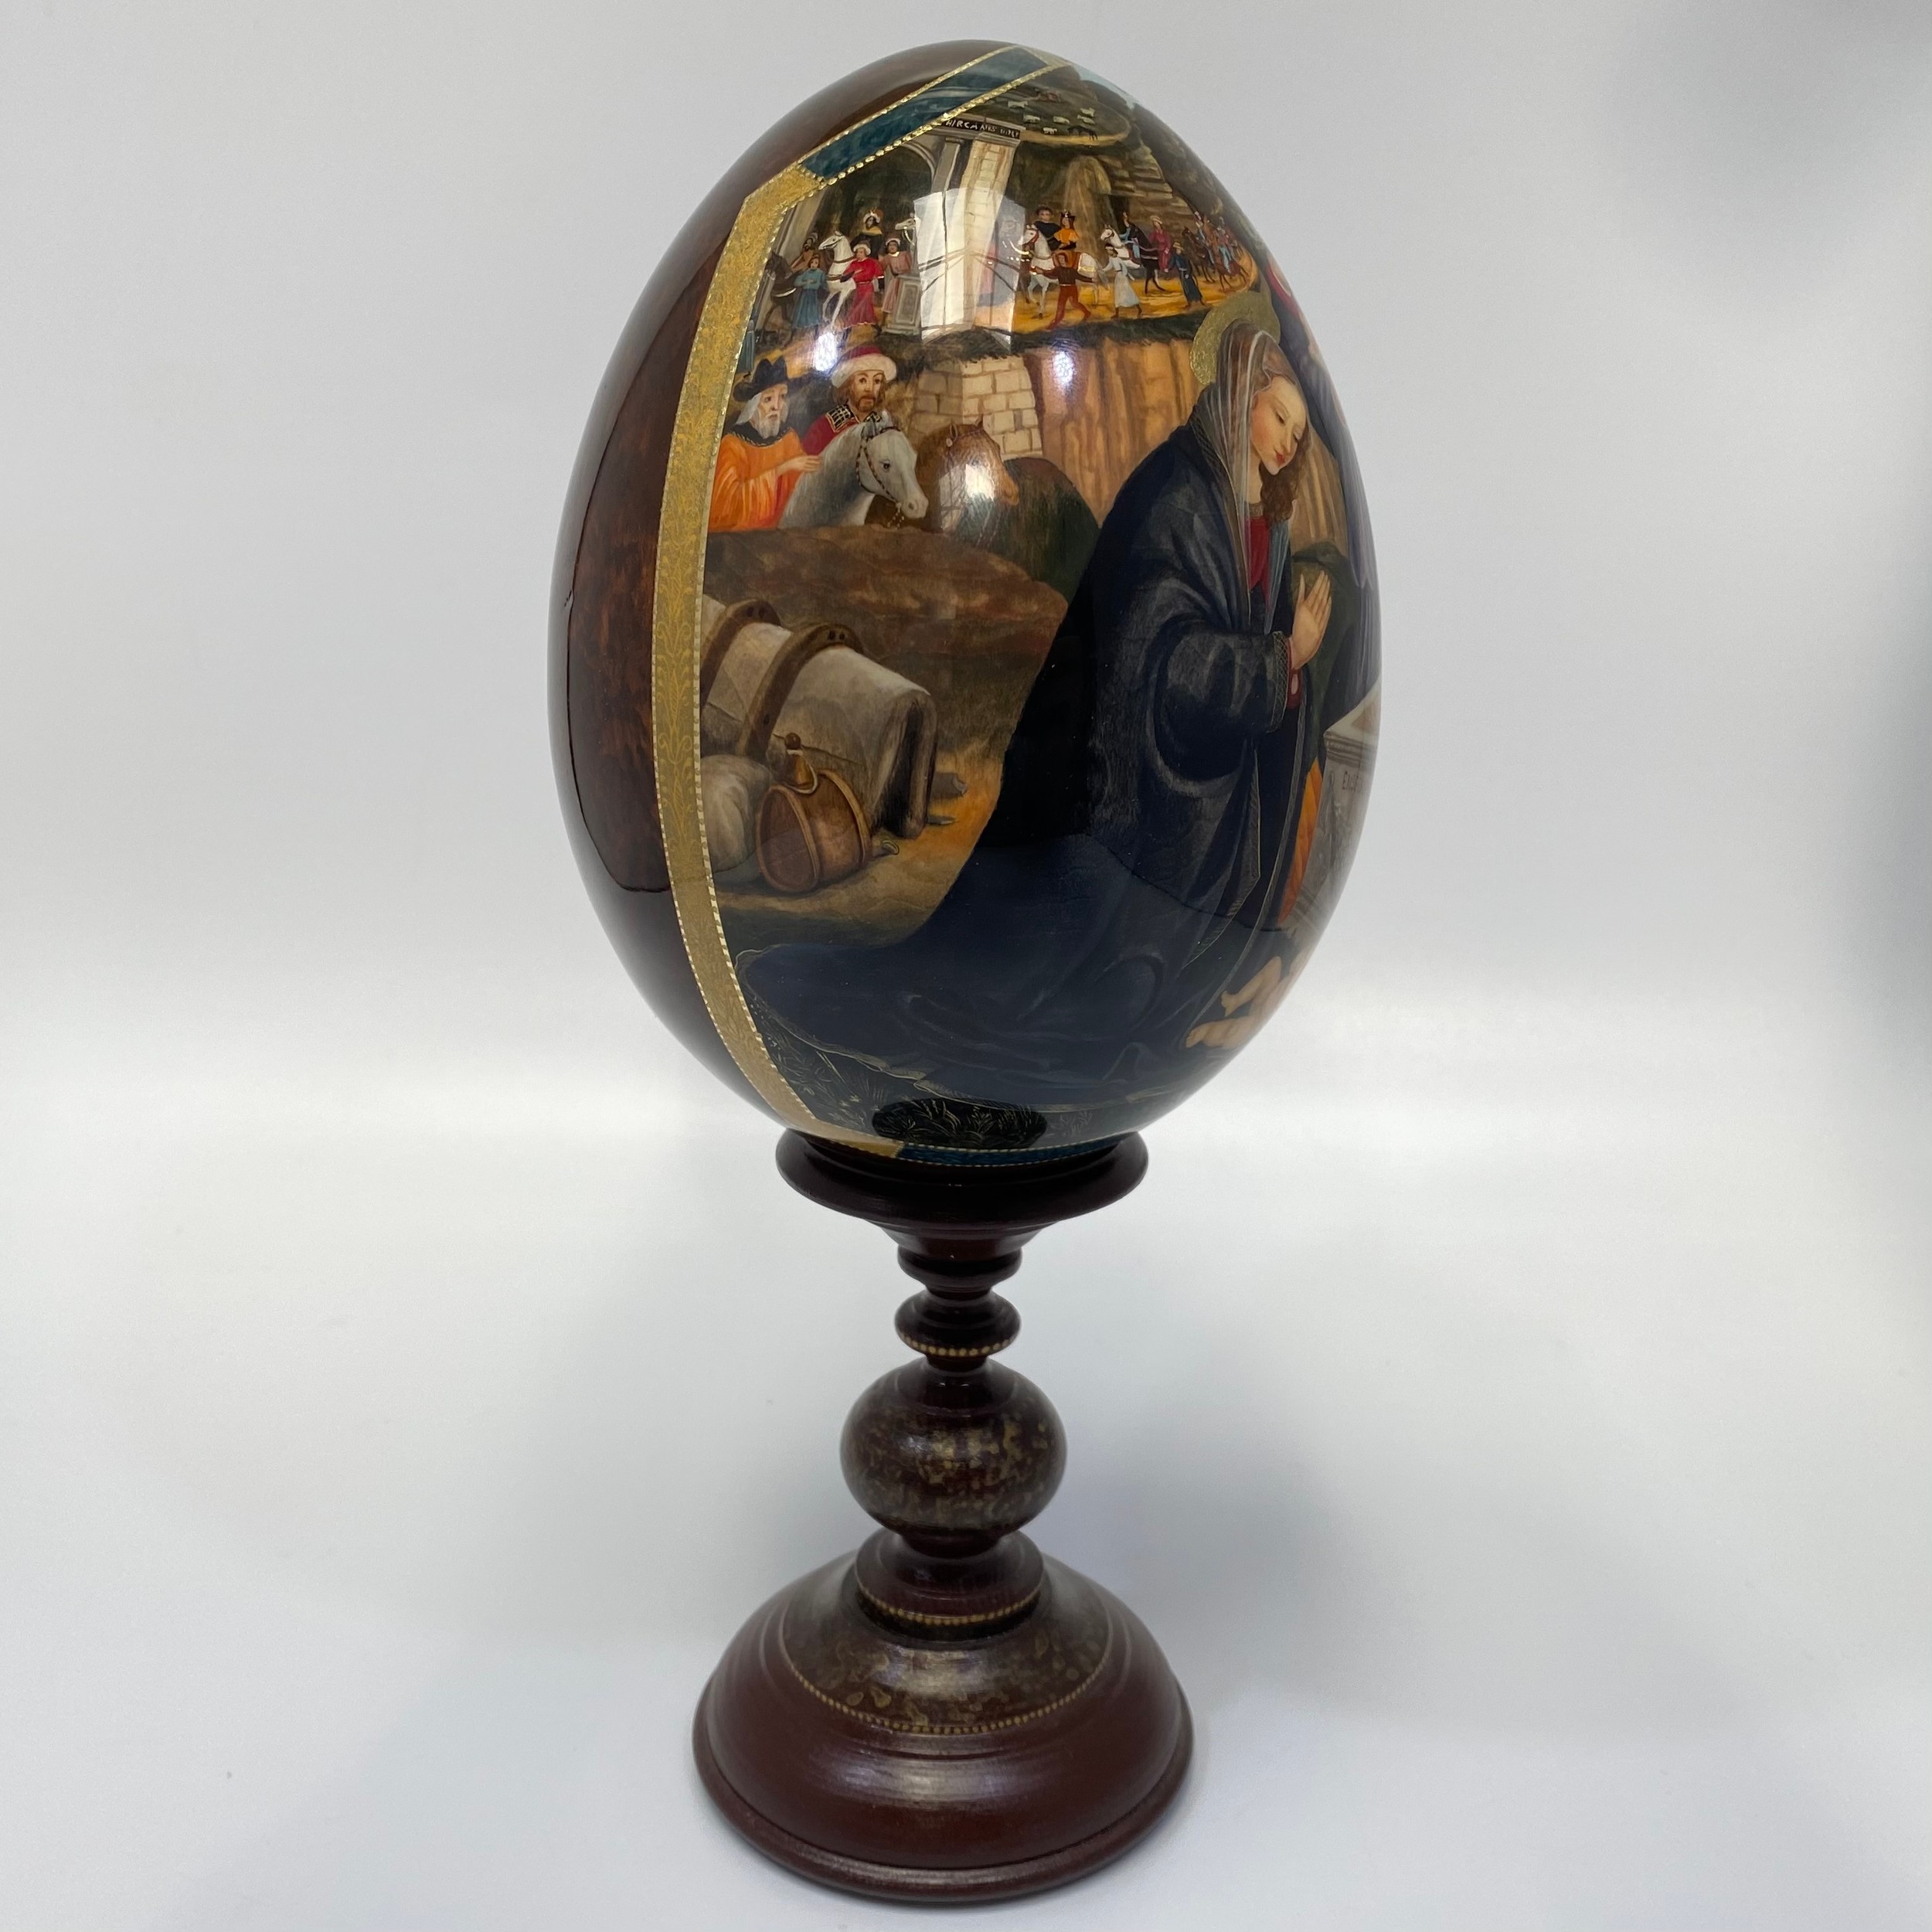 A St Petersburg hand-painted and laquered papier-mache egg depicting the Adoration of the Magi, - Image 2 of 5